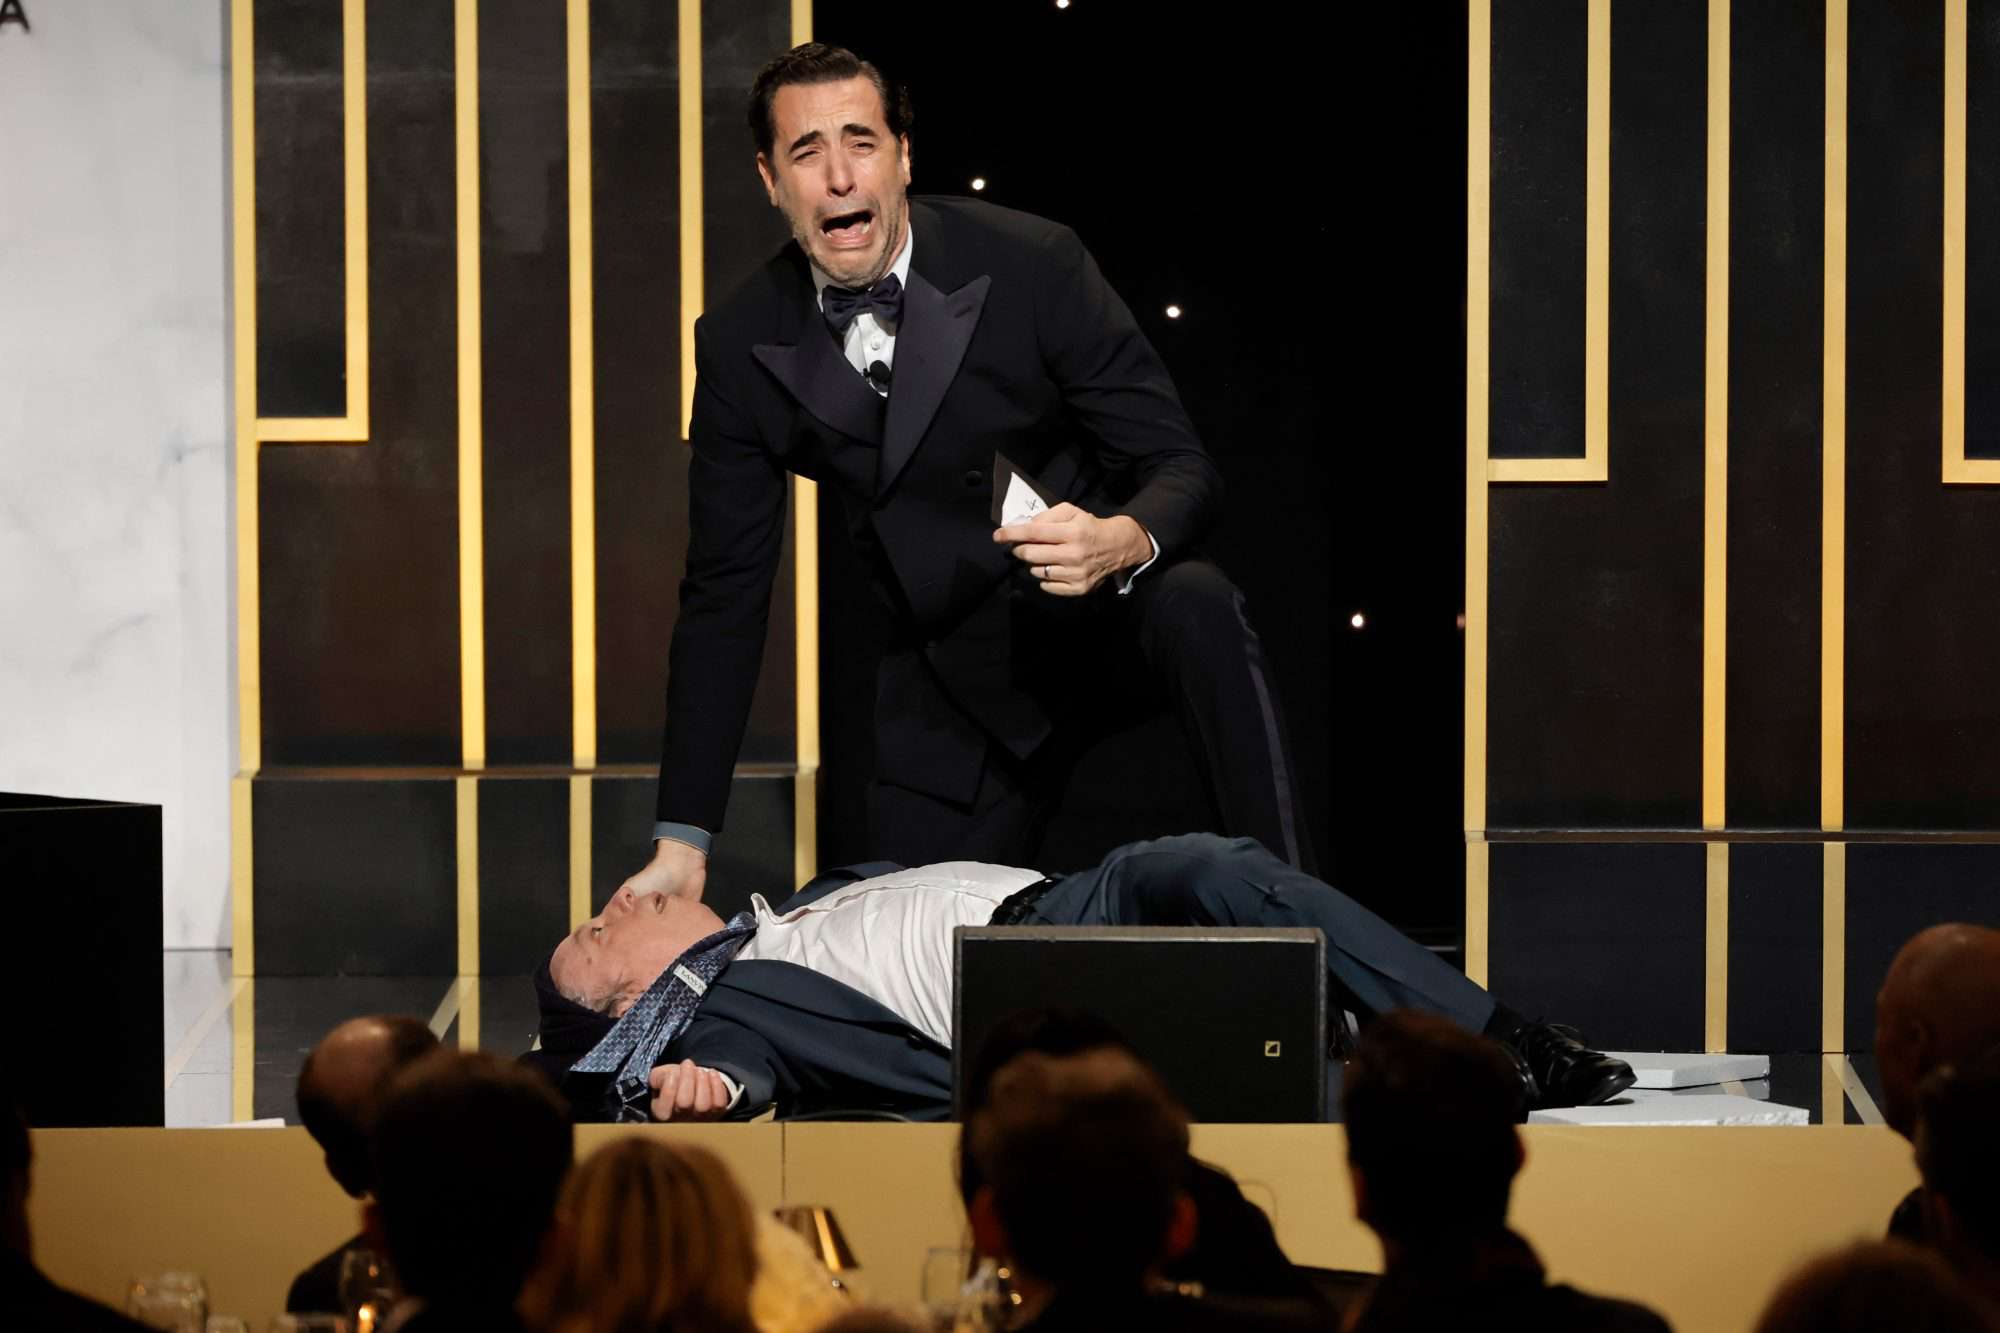 BEVERLY HILLS, CALIFORNIA - FEBRUARY 25: Sacha Baron Cohen acts out a skit onstage during the 2023 Producers Guild Awards at The Beverly Hilton on February 25, 2023 in Beverly Hills, California. (Photo by Kevin Winter/GA/The Hollywood Reporter via Getty Images)